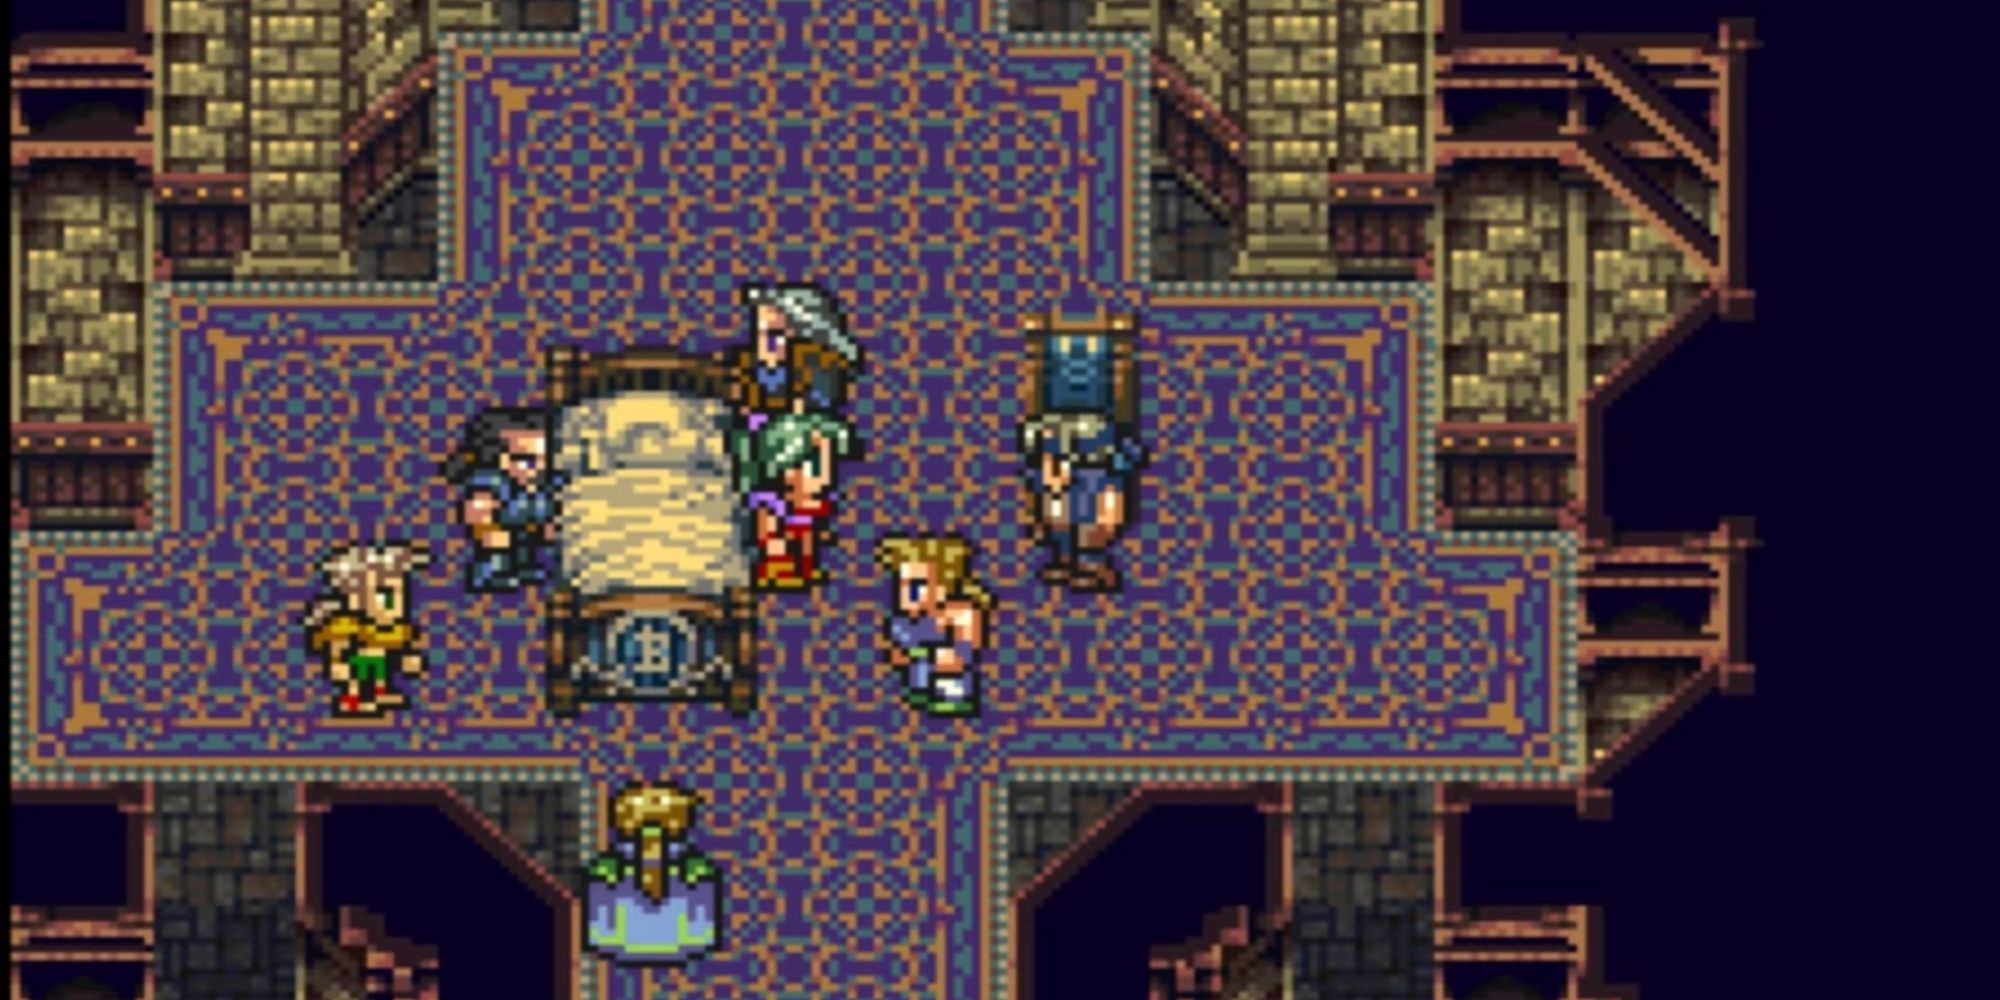 Player gathers his allies before heading out to dungeons